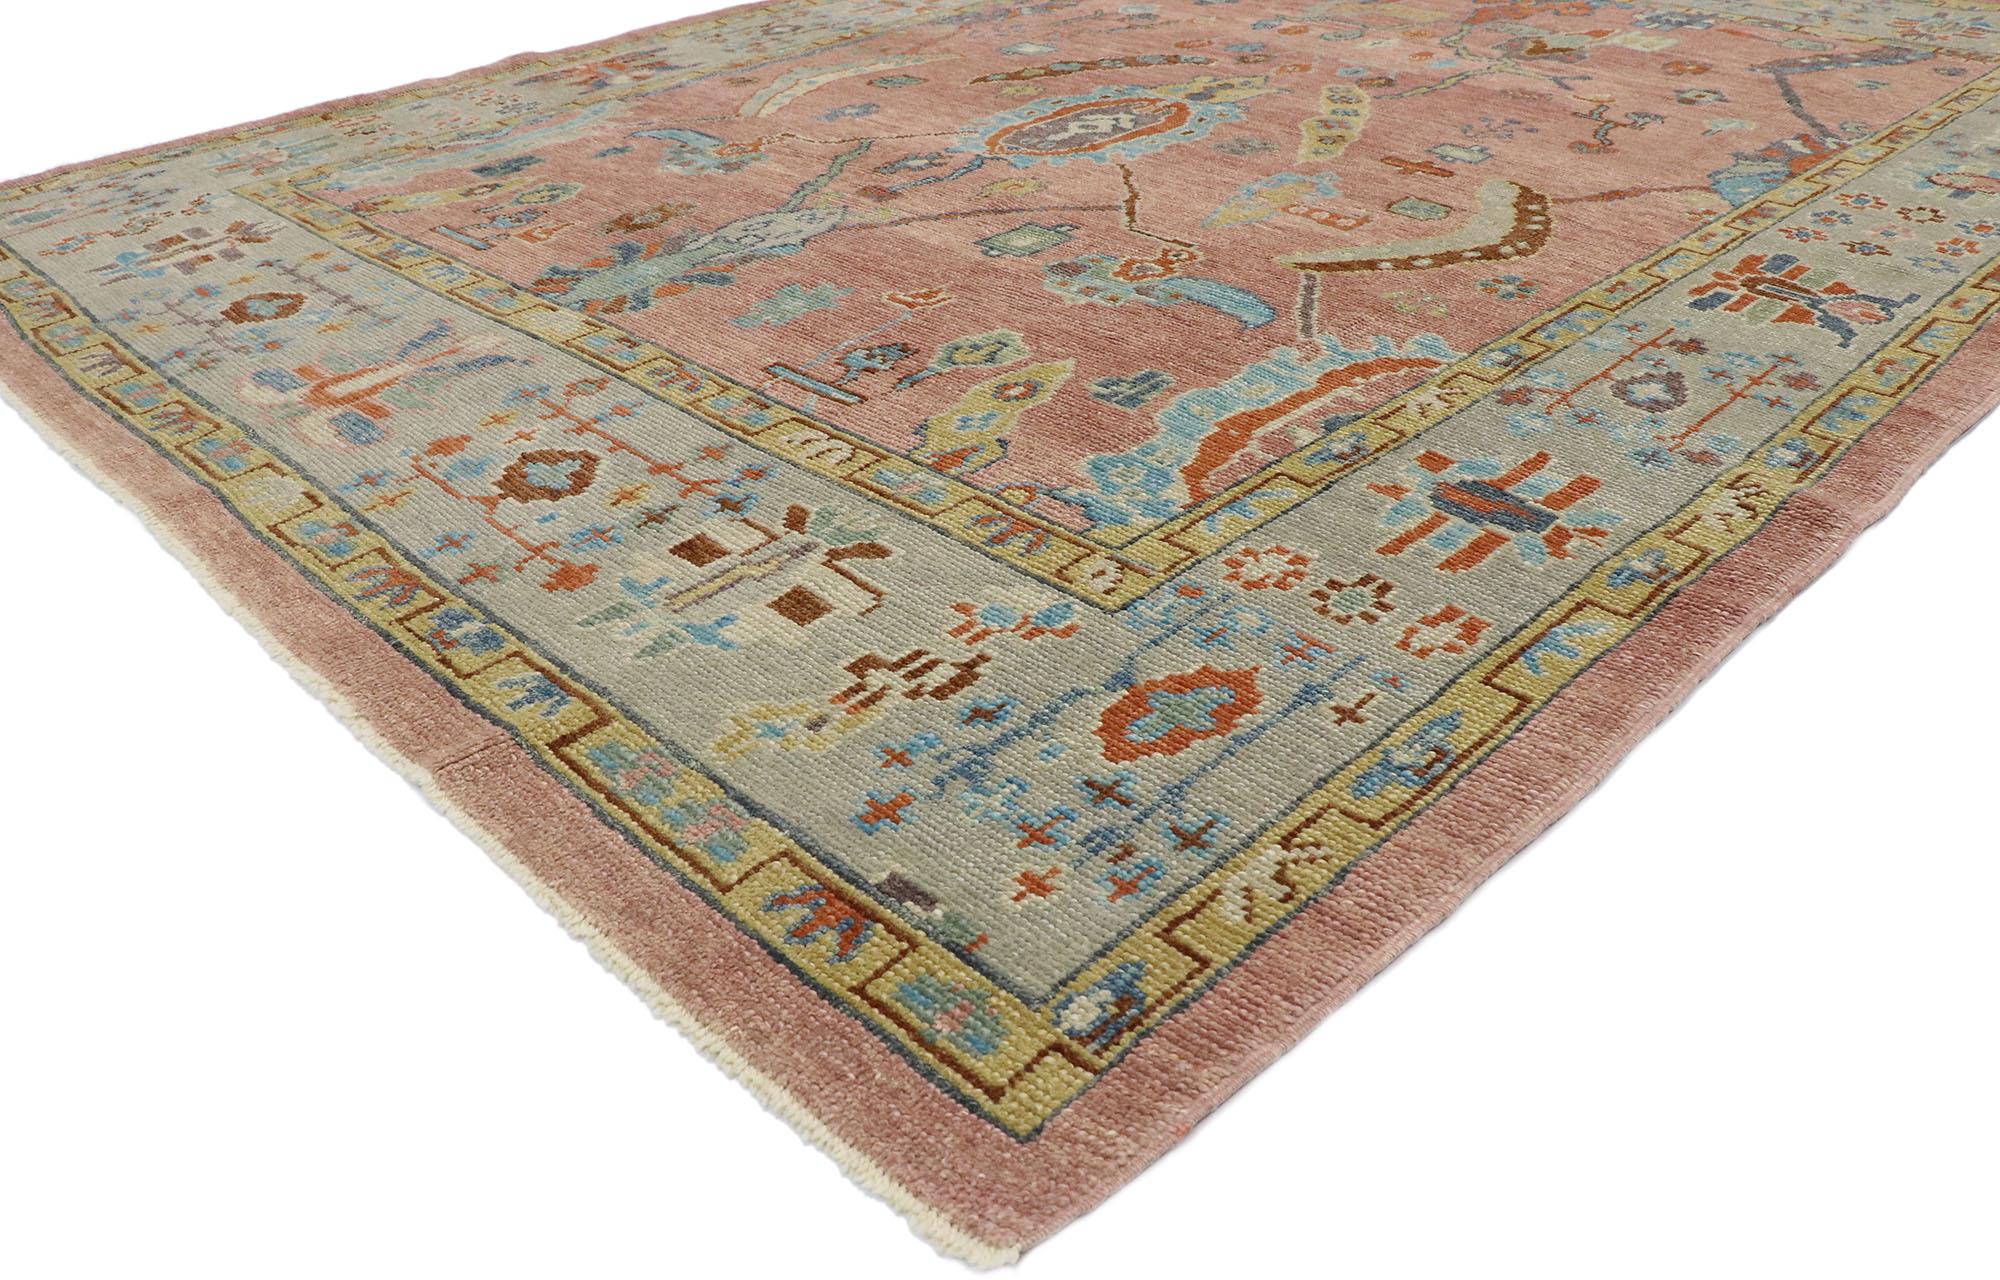 53411 New Contemporary Turkish Oushak rug with Modern Spanish Colonial style. Displaying well-balanced asymmetry and eclectic refinement combined with timeless elegance of Spanish Colonial aesthetics, this hand-knotted wool new contemporary Turkish